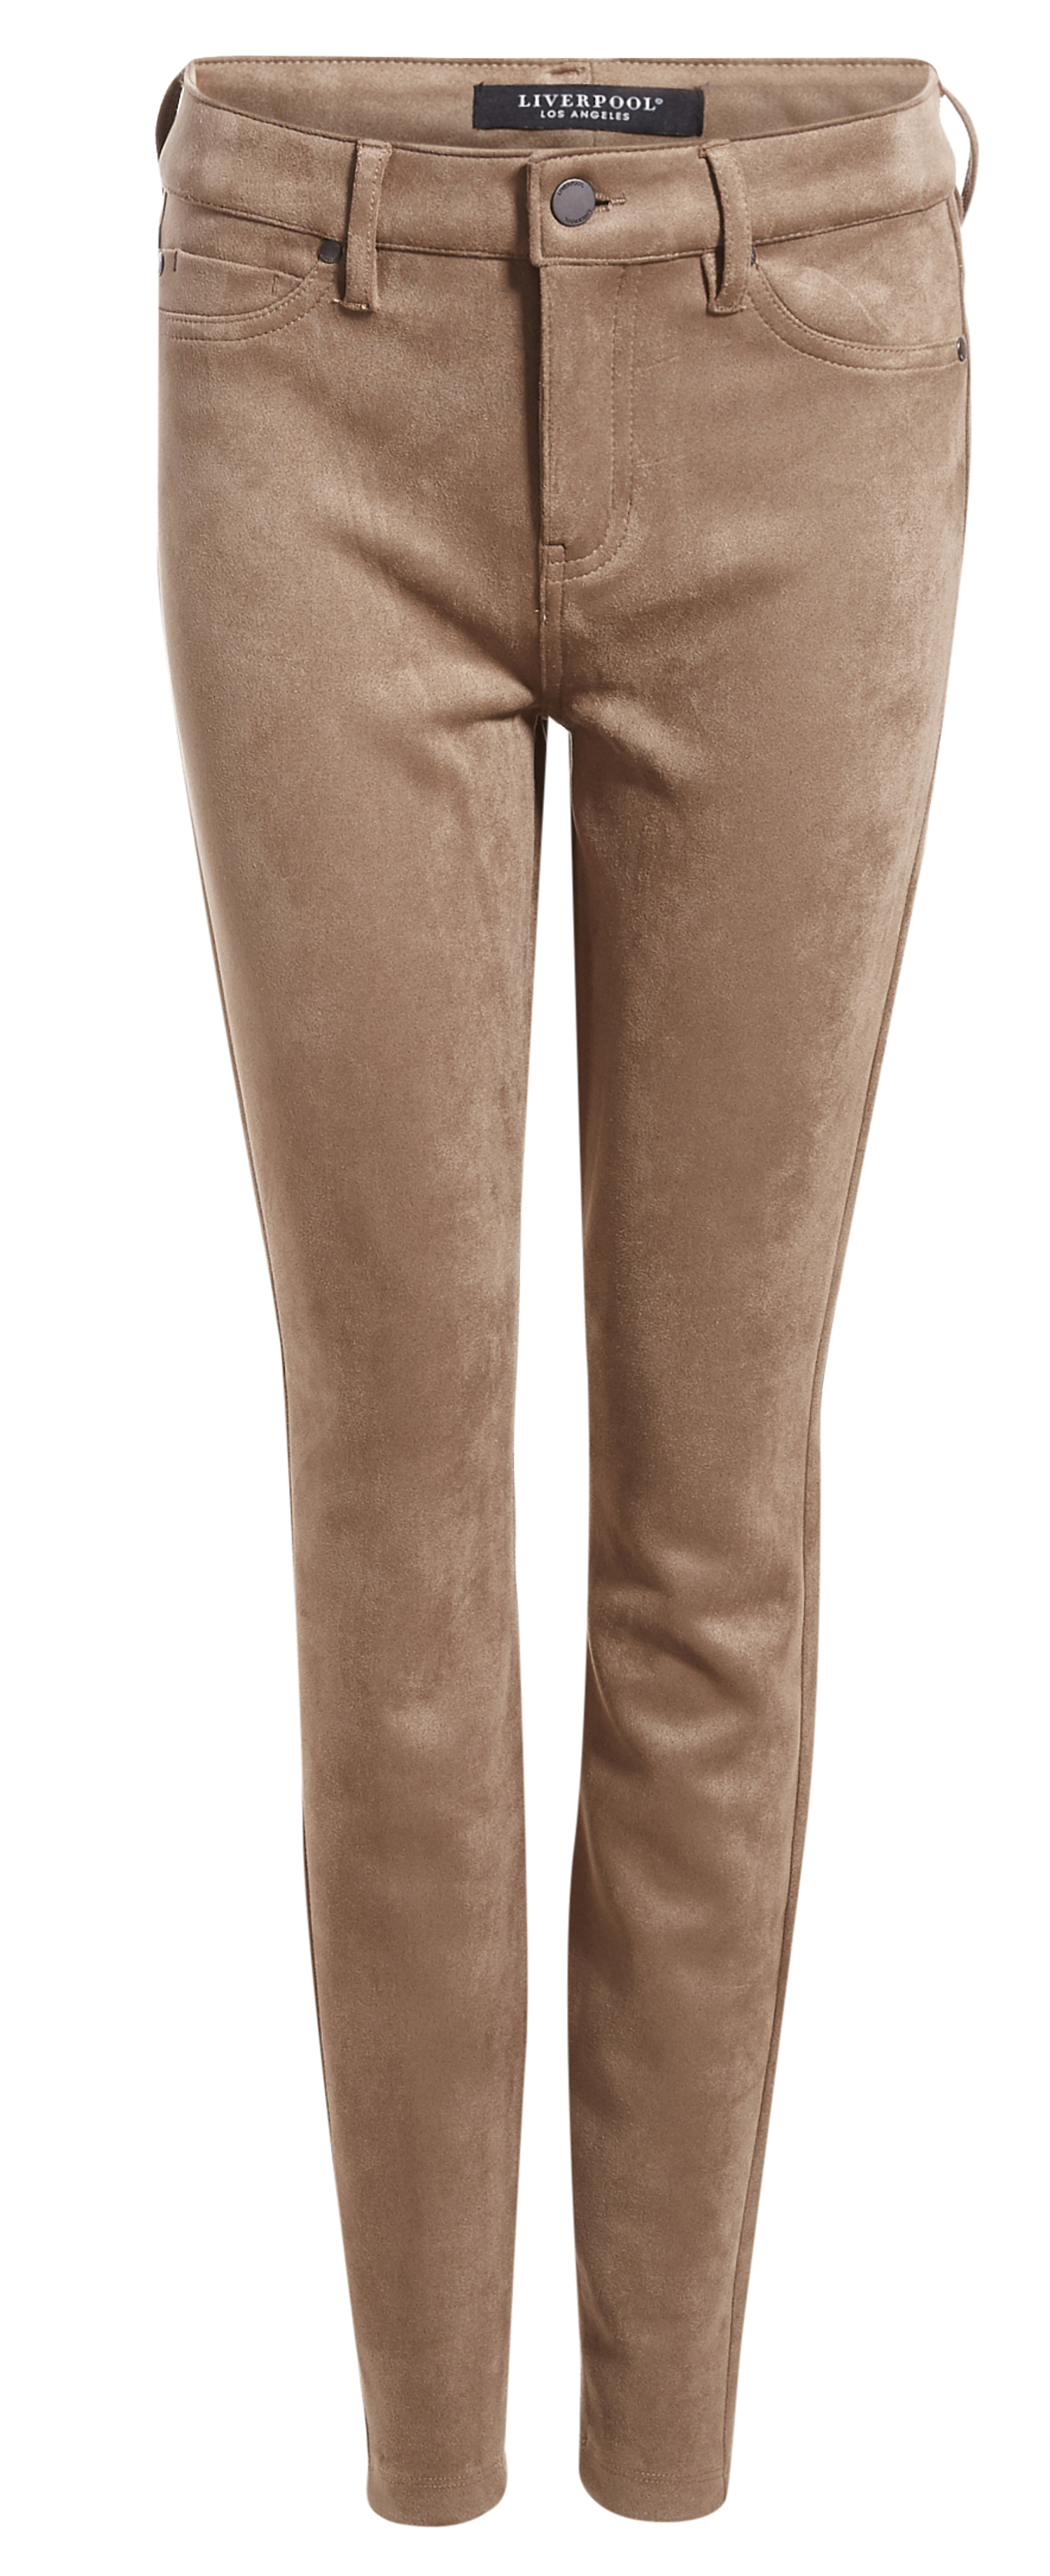 Liverpool Suede High Rise Skinny